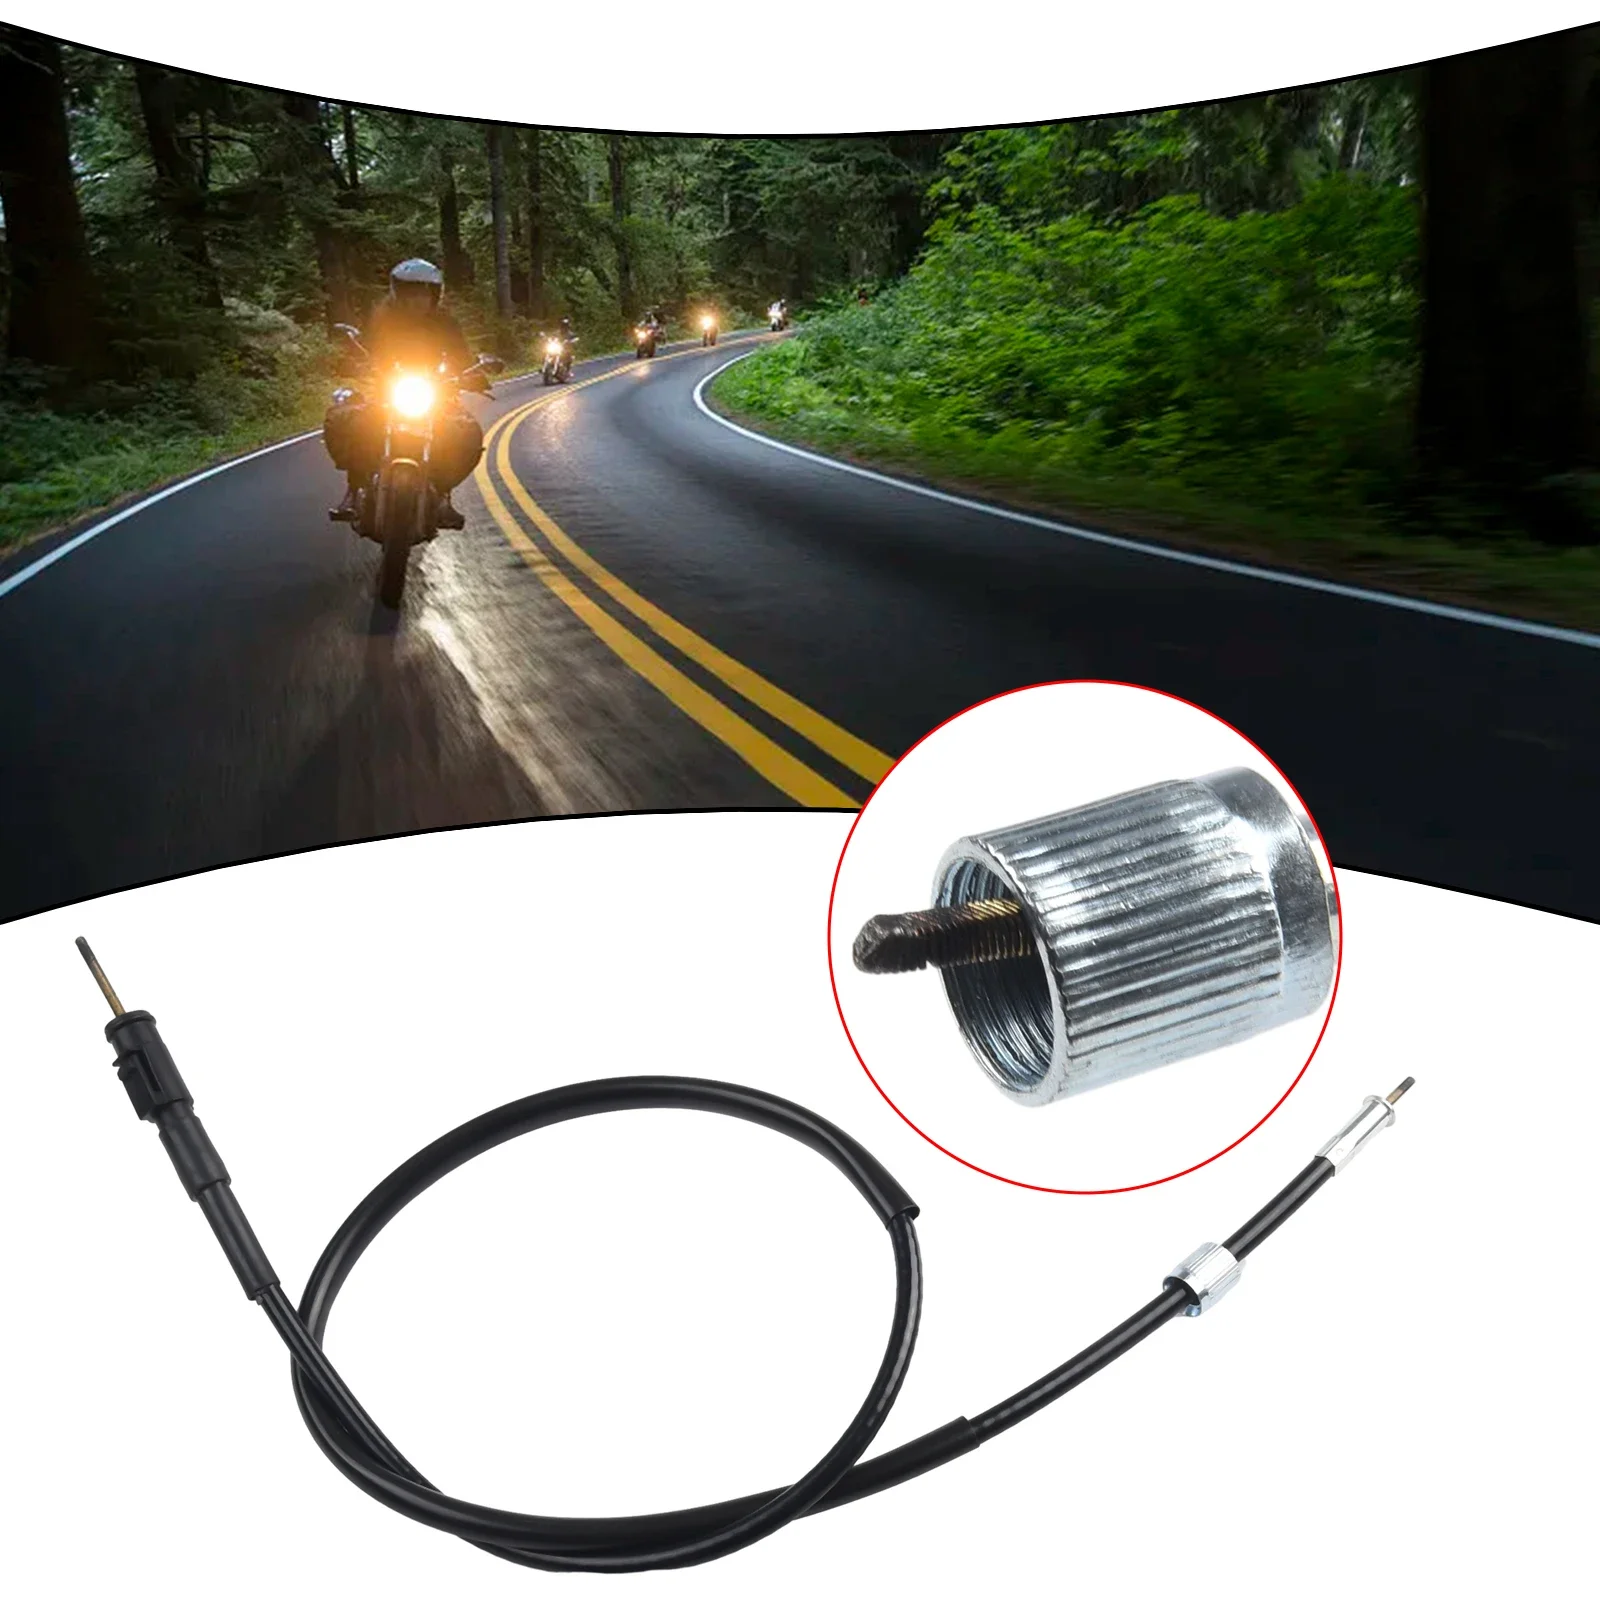 1PC Motorcycle Speedometer Cable Wires Scooter For Honda For Dio Vision 110 50 Scooter Accessories Odometer Kilometer Drive Line